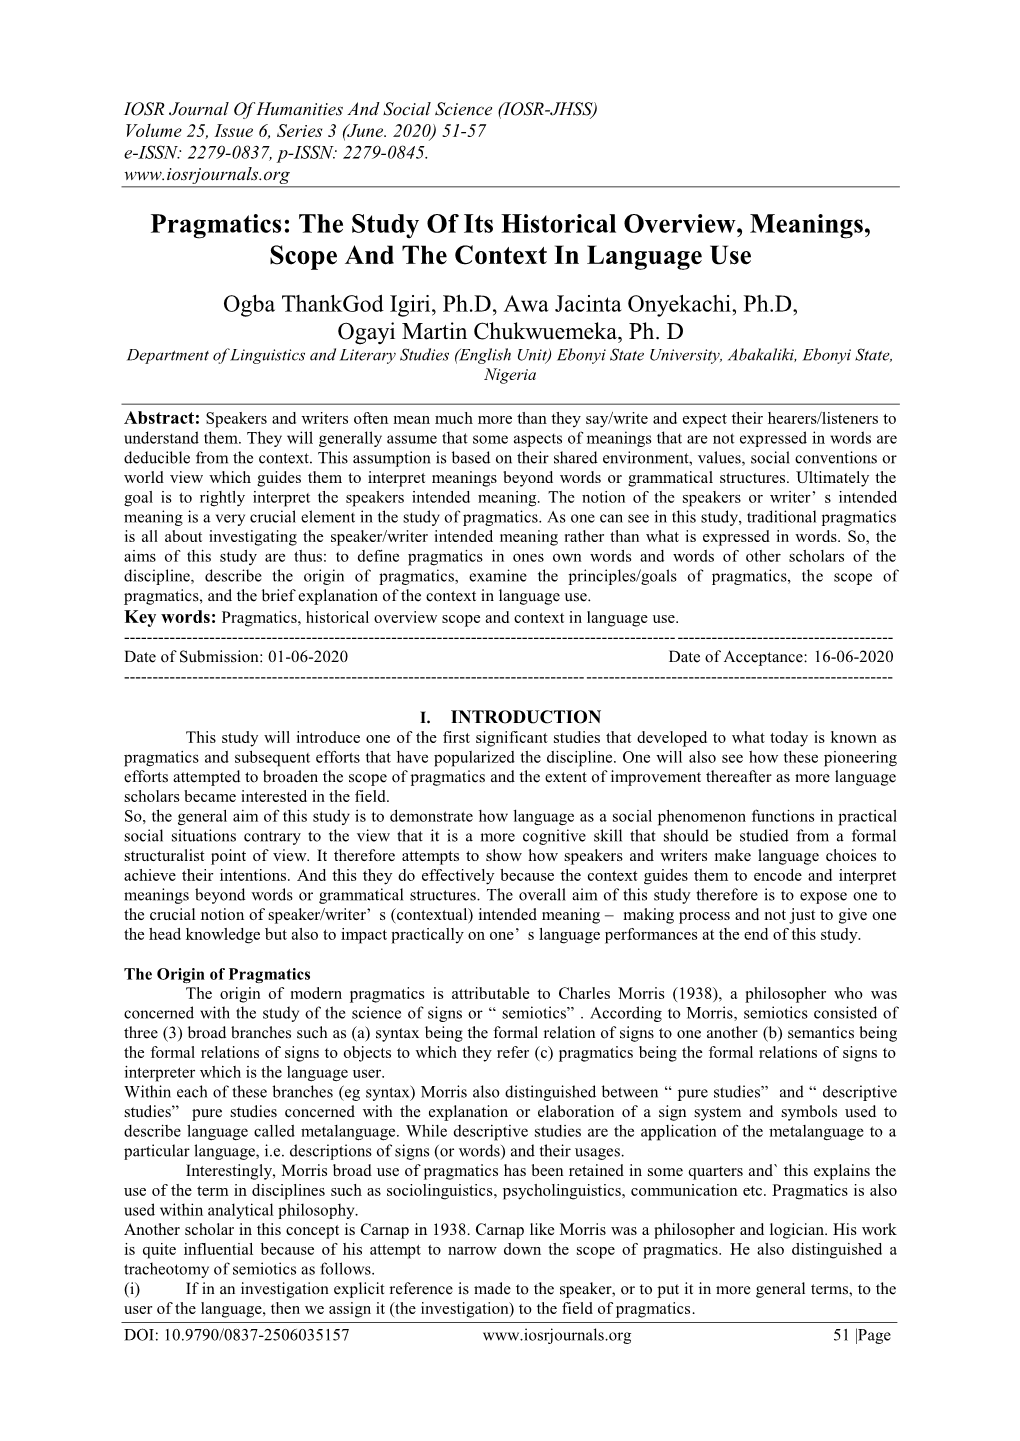 Pragmatics: the Study of Its Historical Overview, Meanings, Scope and the Context in Language Use